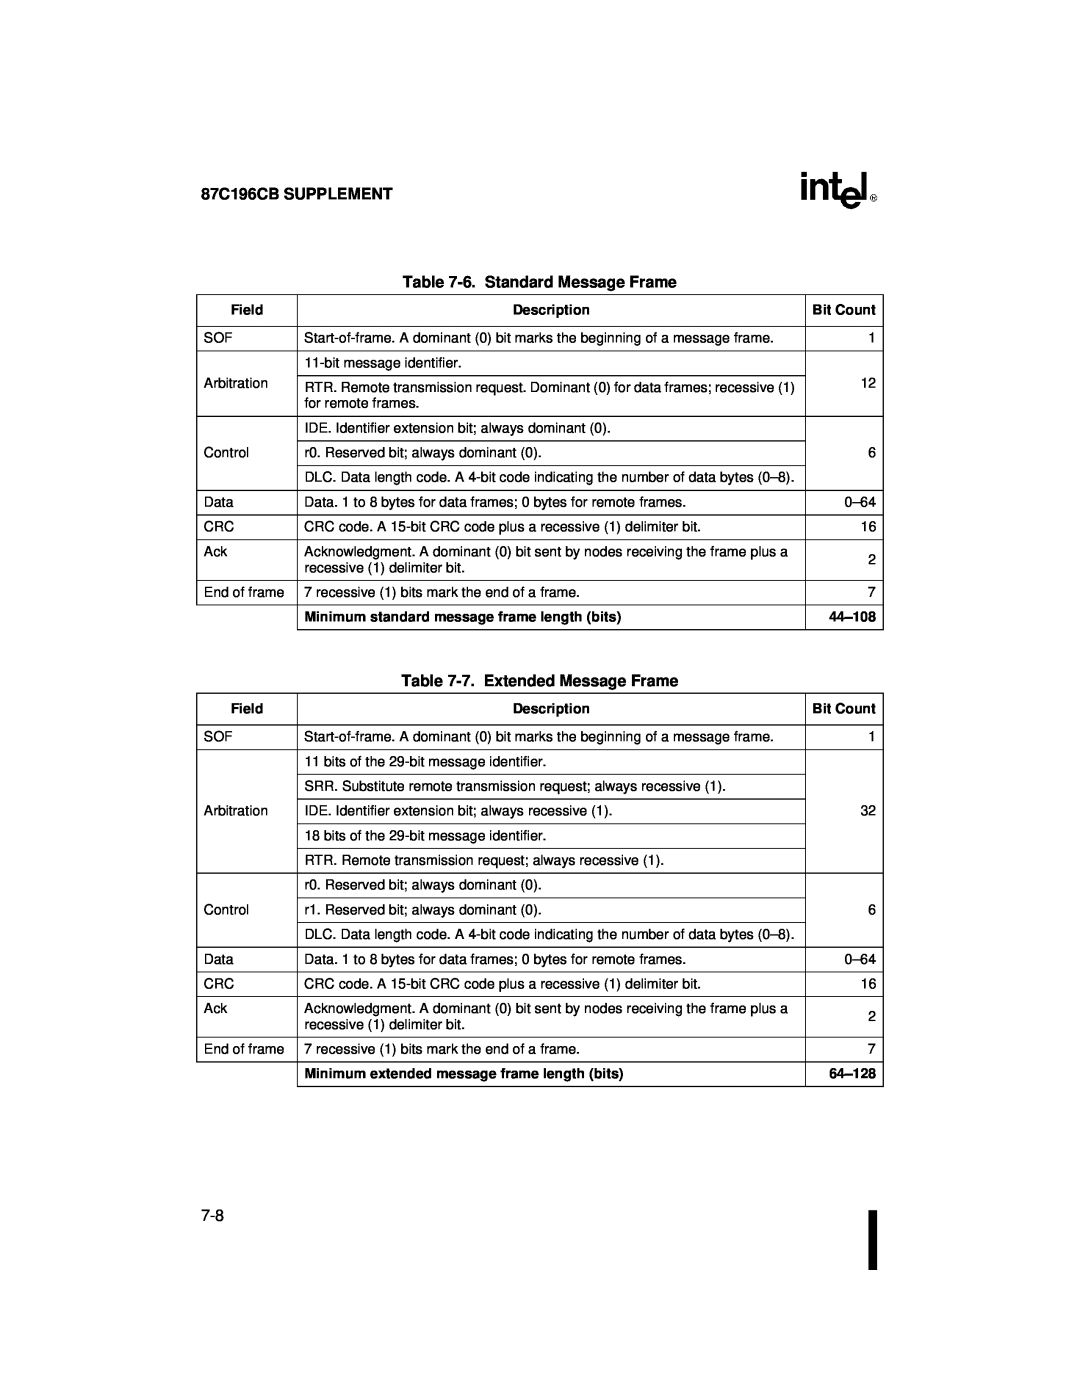 Intel 8XC196NT user manual 87C196CB SUPPLEMENT -6. Standard Message Frame, 7. Extended Message Frame 